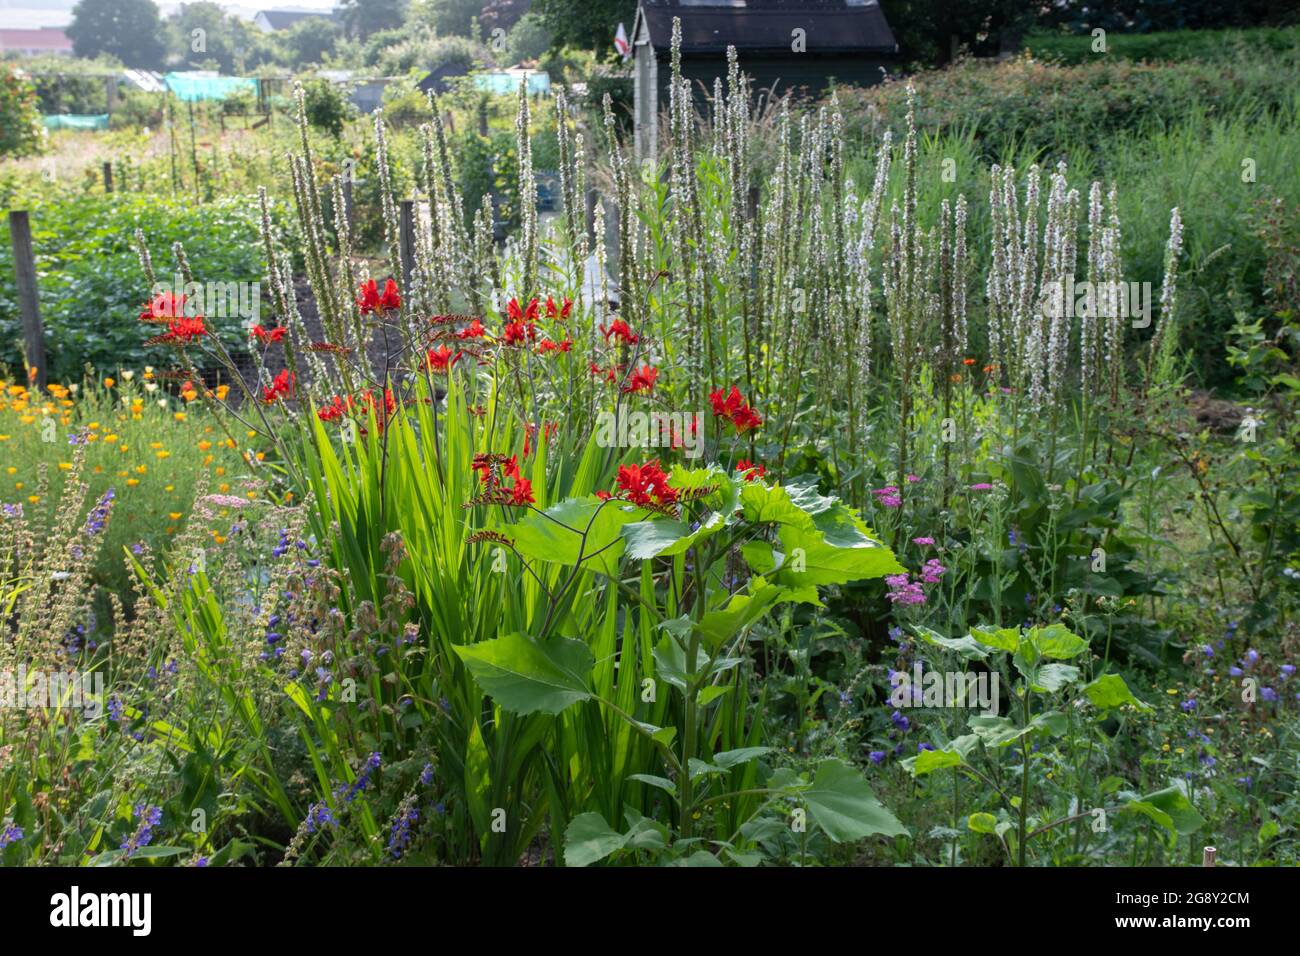 Cut flower garden at our allotment Stock Photo